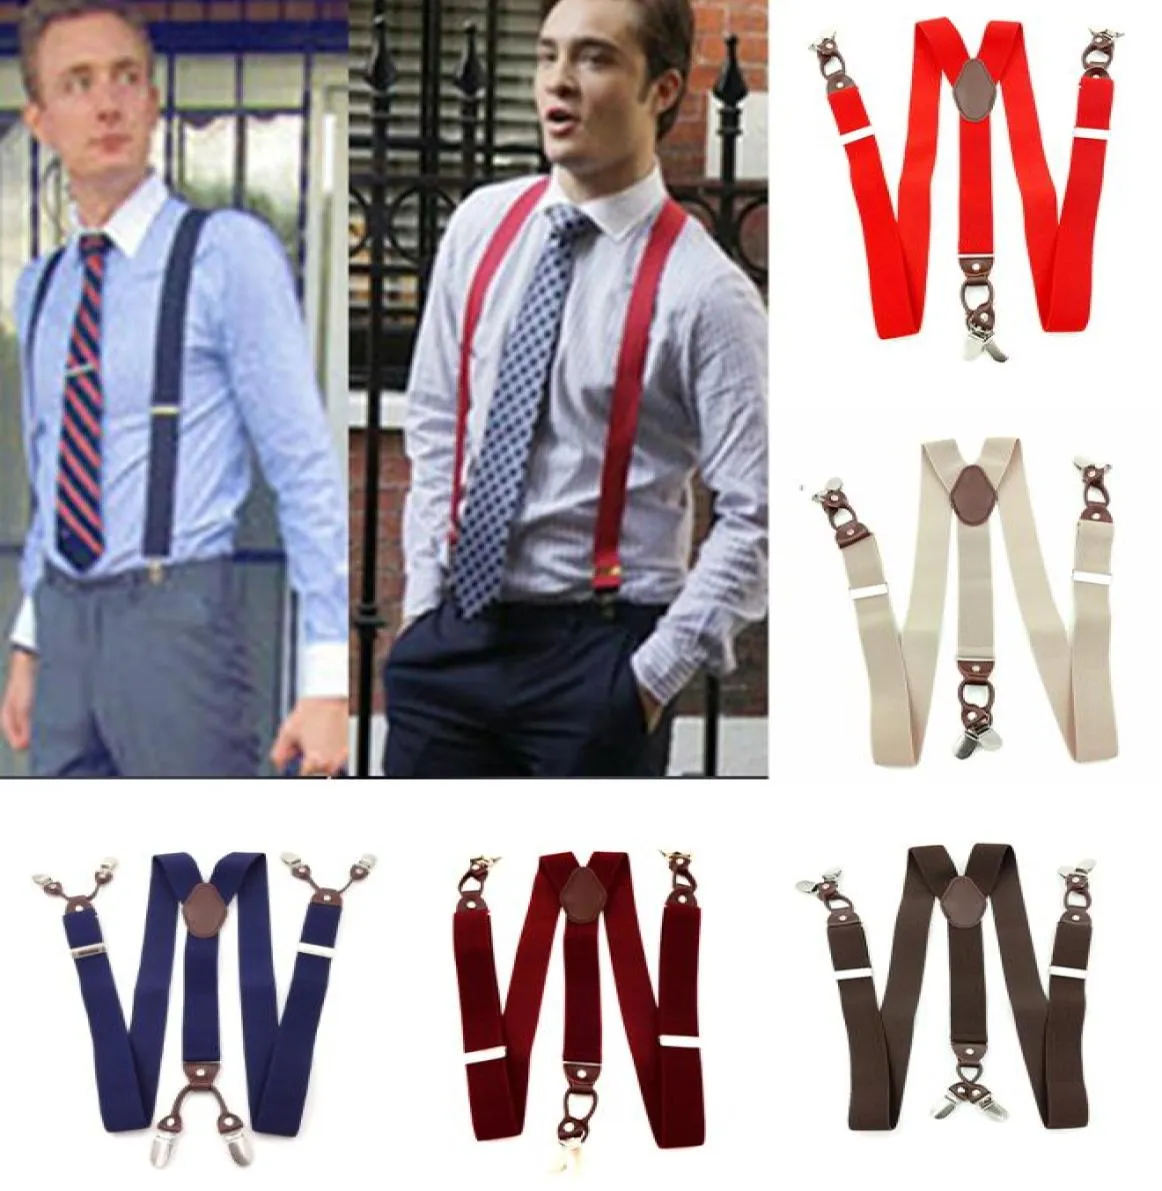 Leather Alloy 6 Clips YBack Elastic Suspenders for Male Vintage Casual Commercial Wsternstyle TrousersWine Red9380204